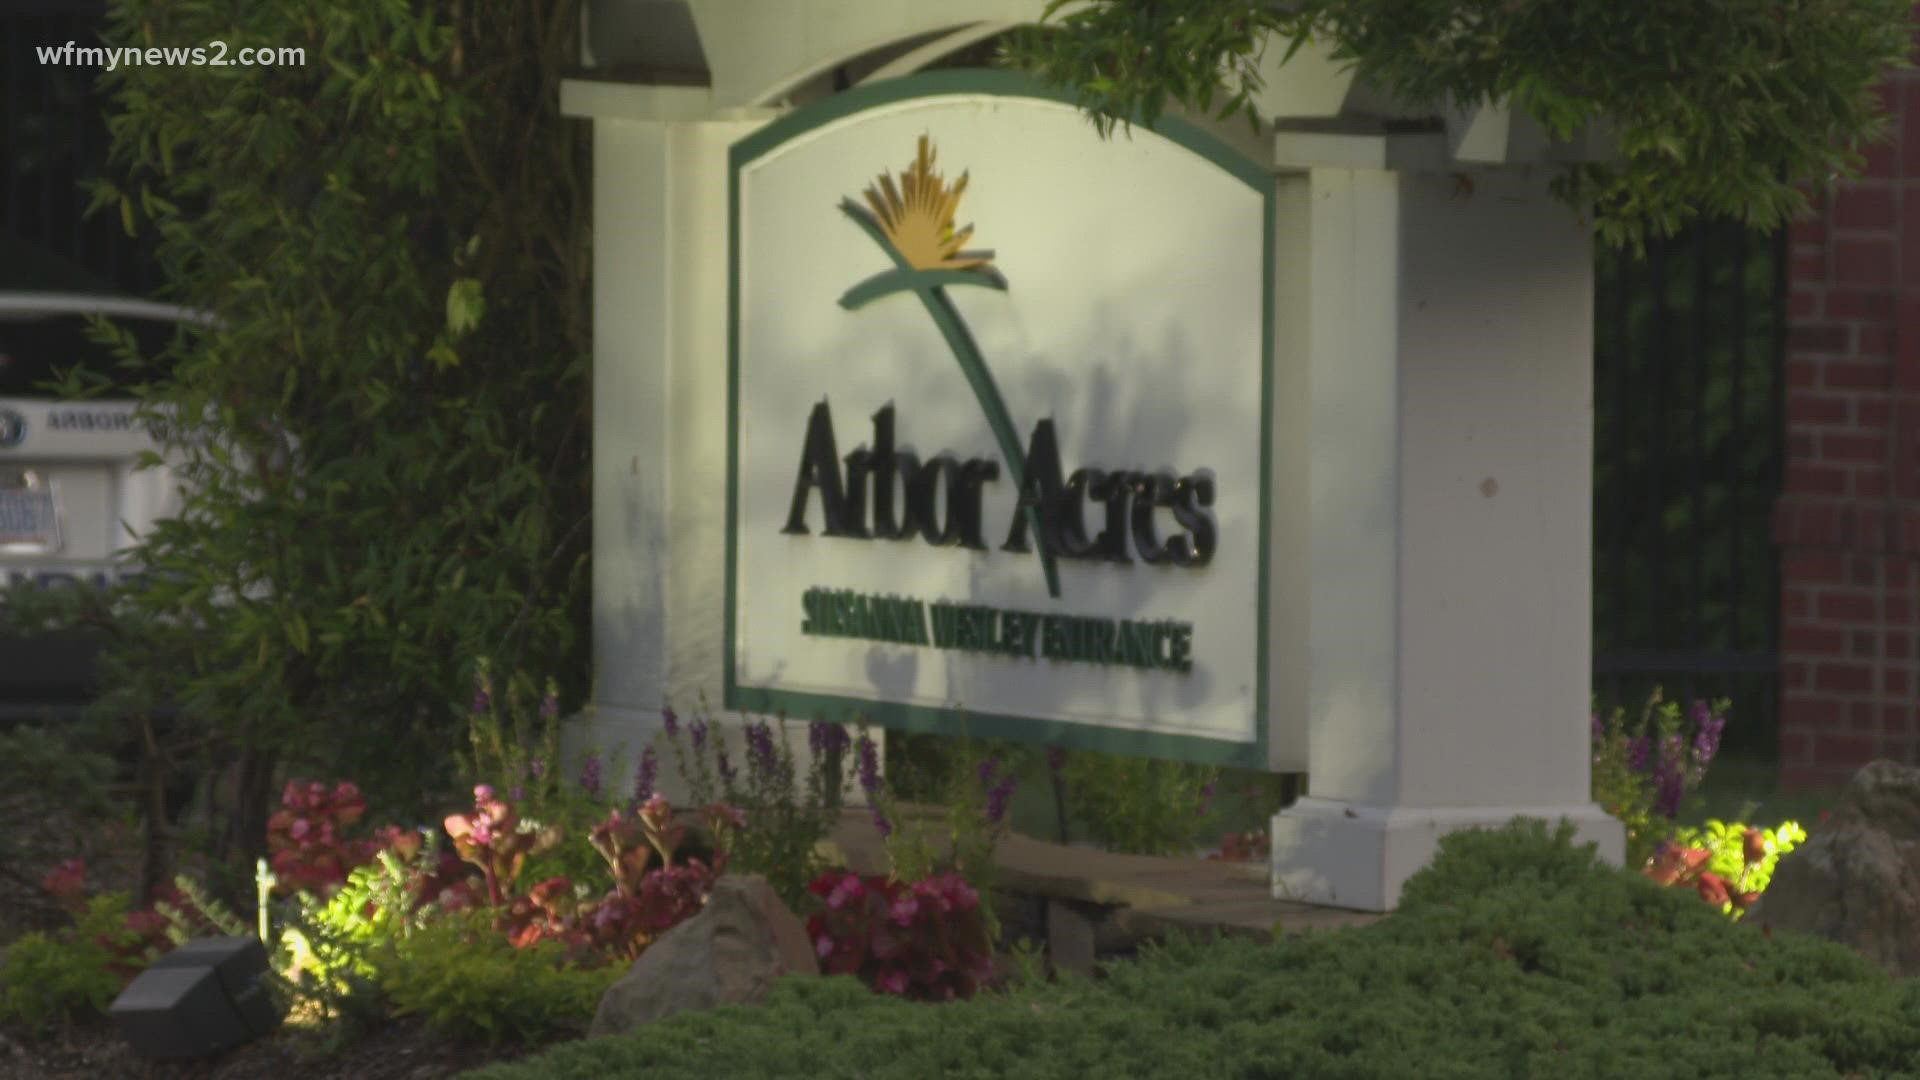 Arbor Acres said its staff must get the coronavirus vaccine by the end of October.